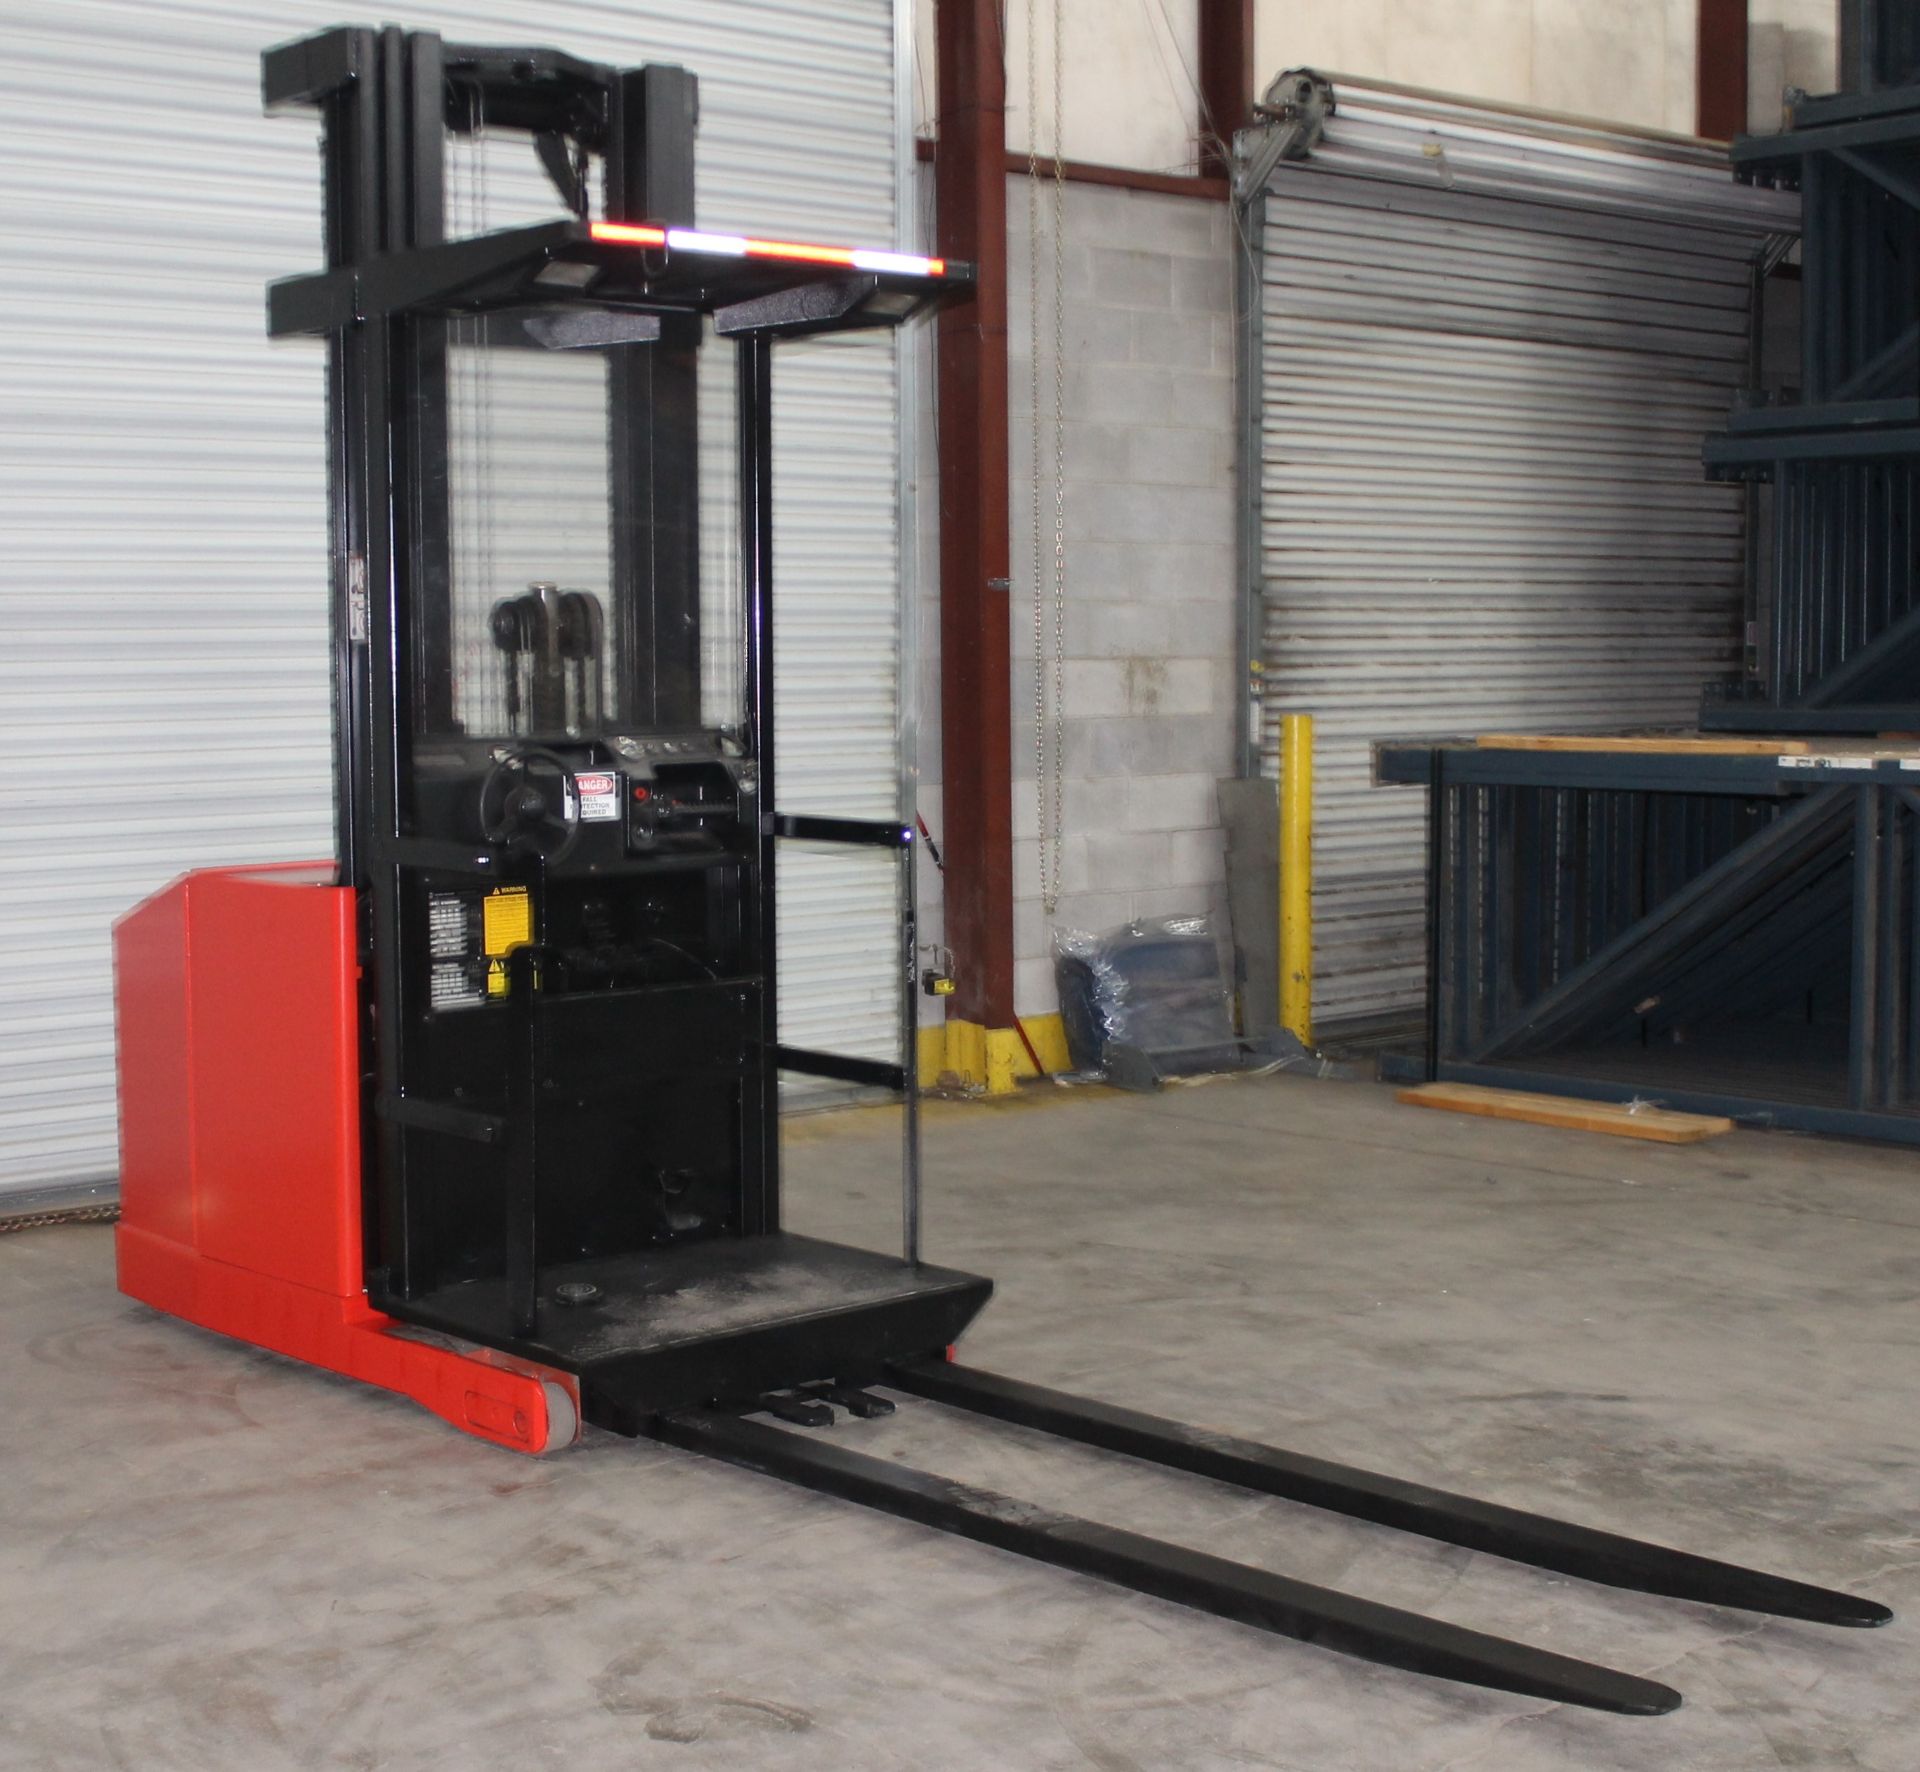 PRIME MOVER 3000 LBS. CAPACITY ORDER PICKER, (WATCH VIDEO)